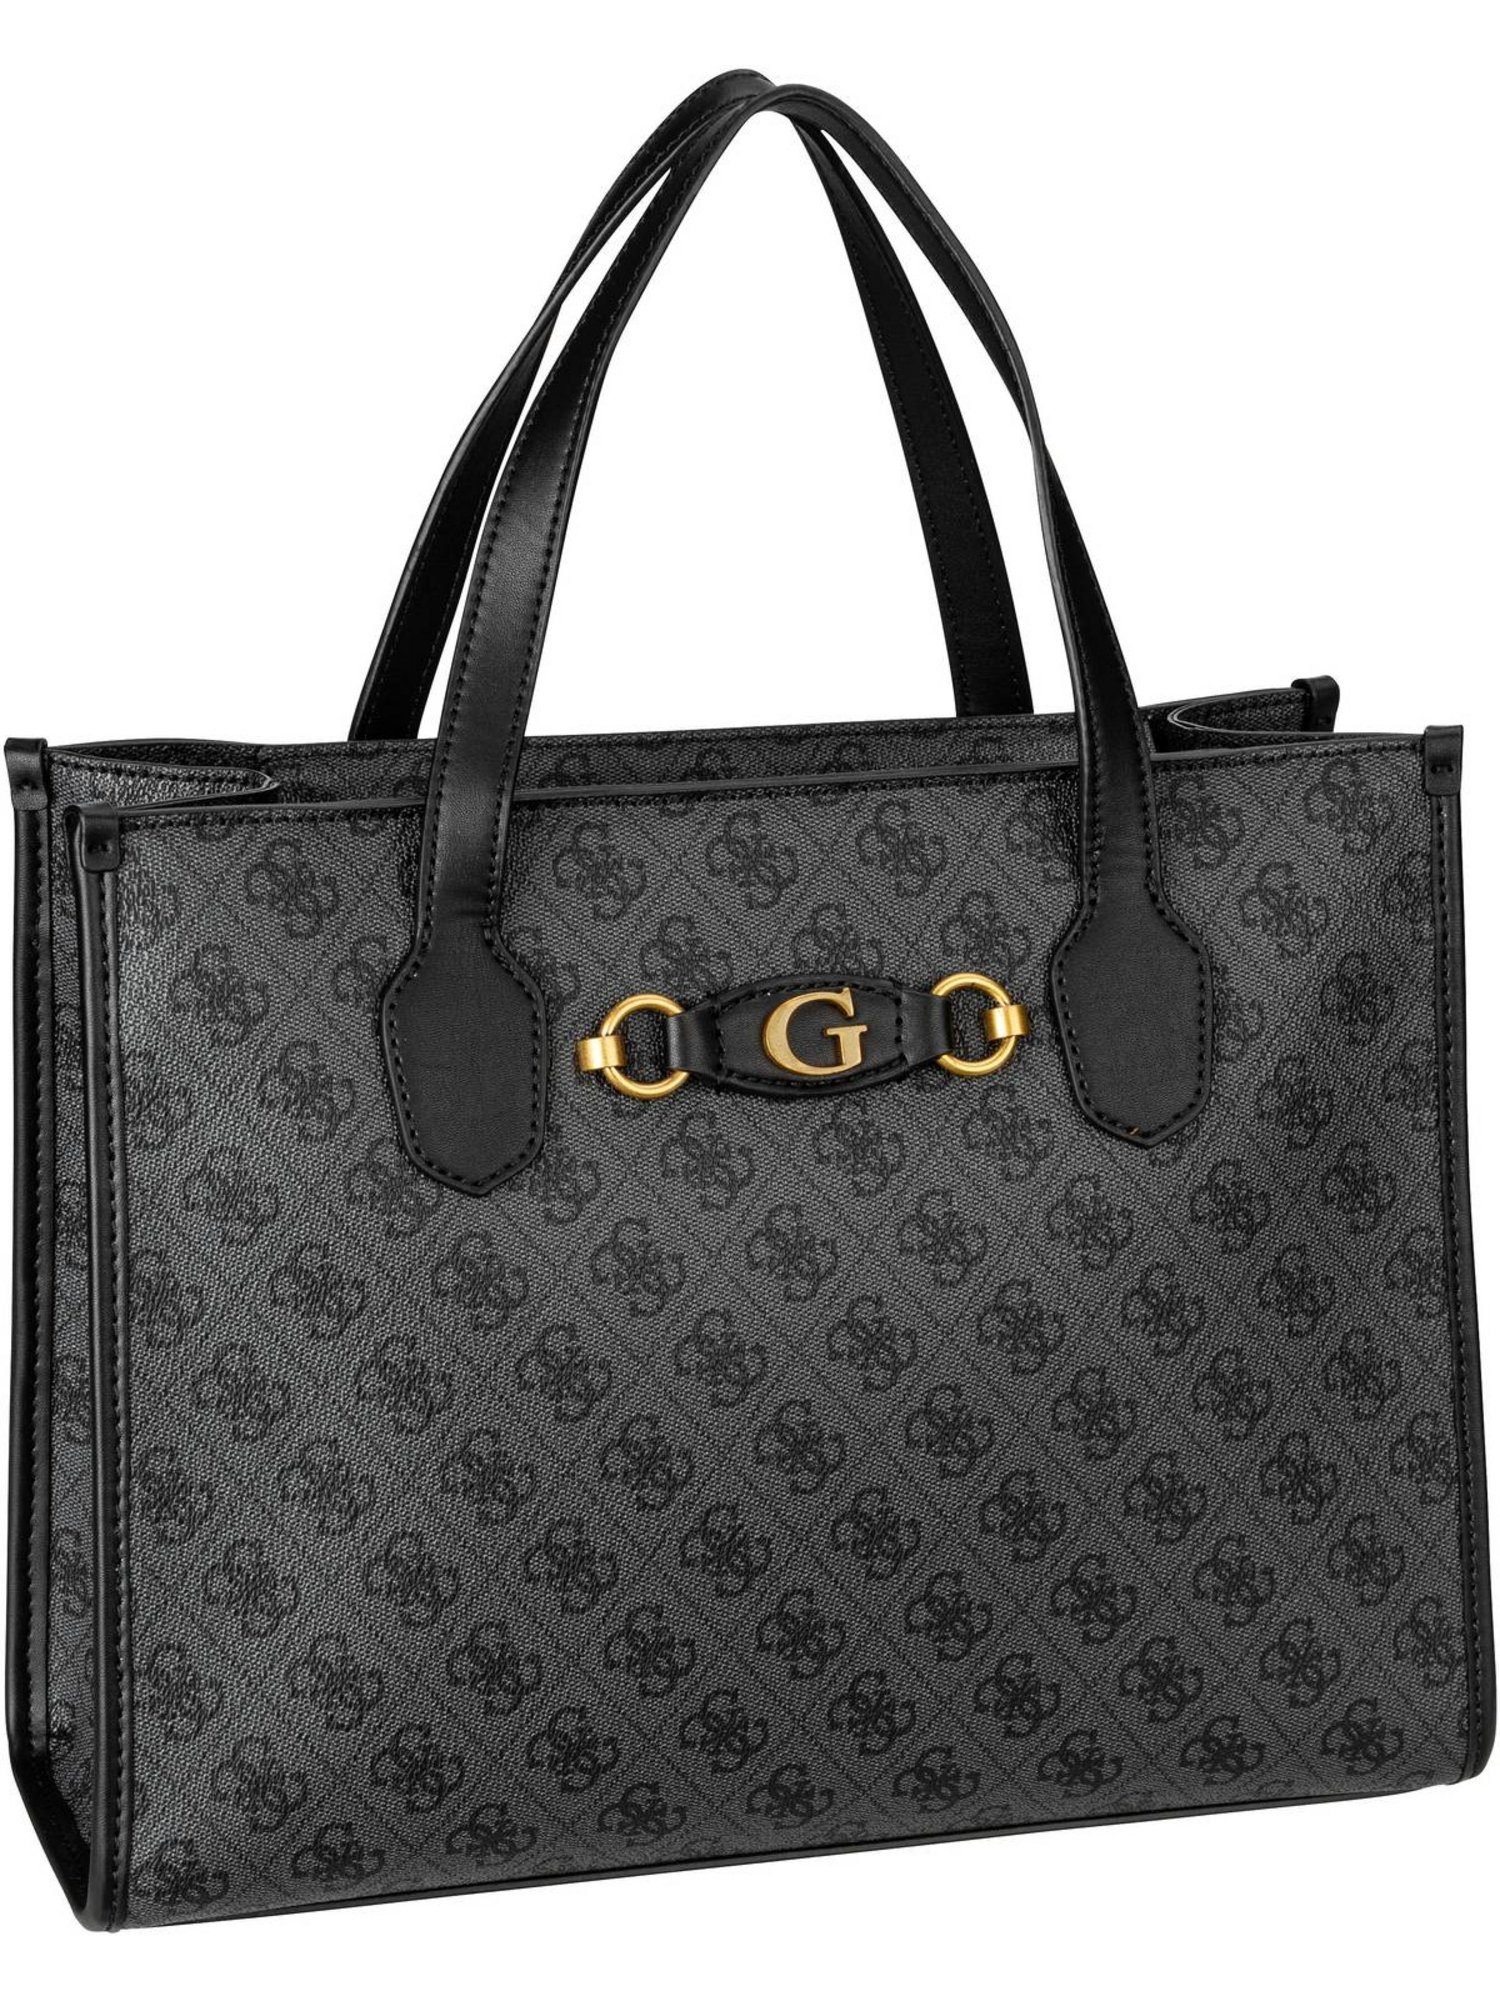 Guess Handtasche Izzy 2 Compartment Tote, Tote Bag Coal Logo